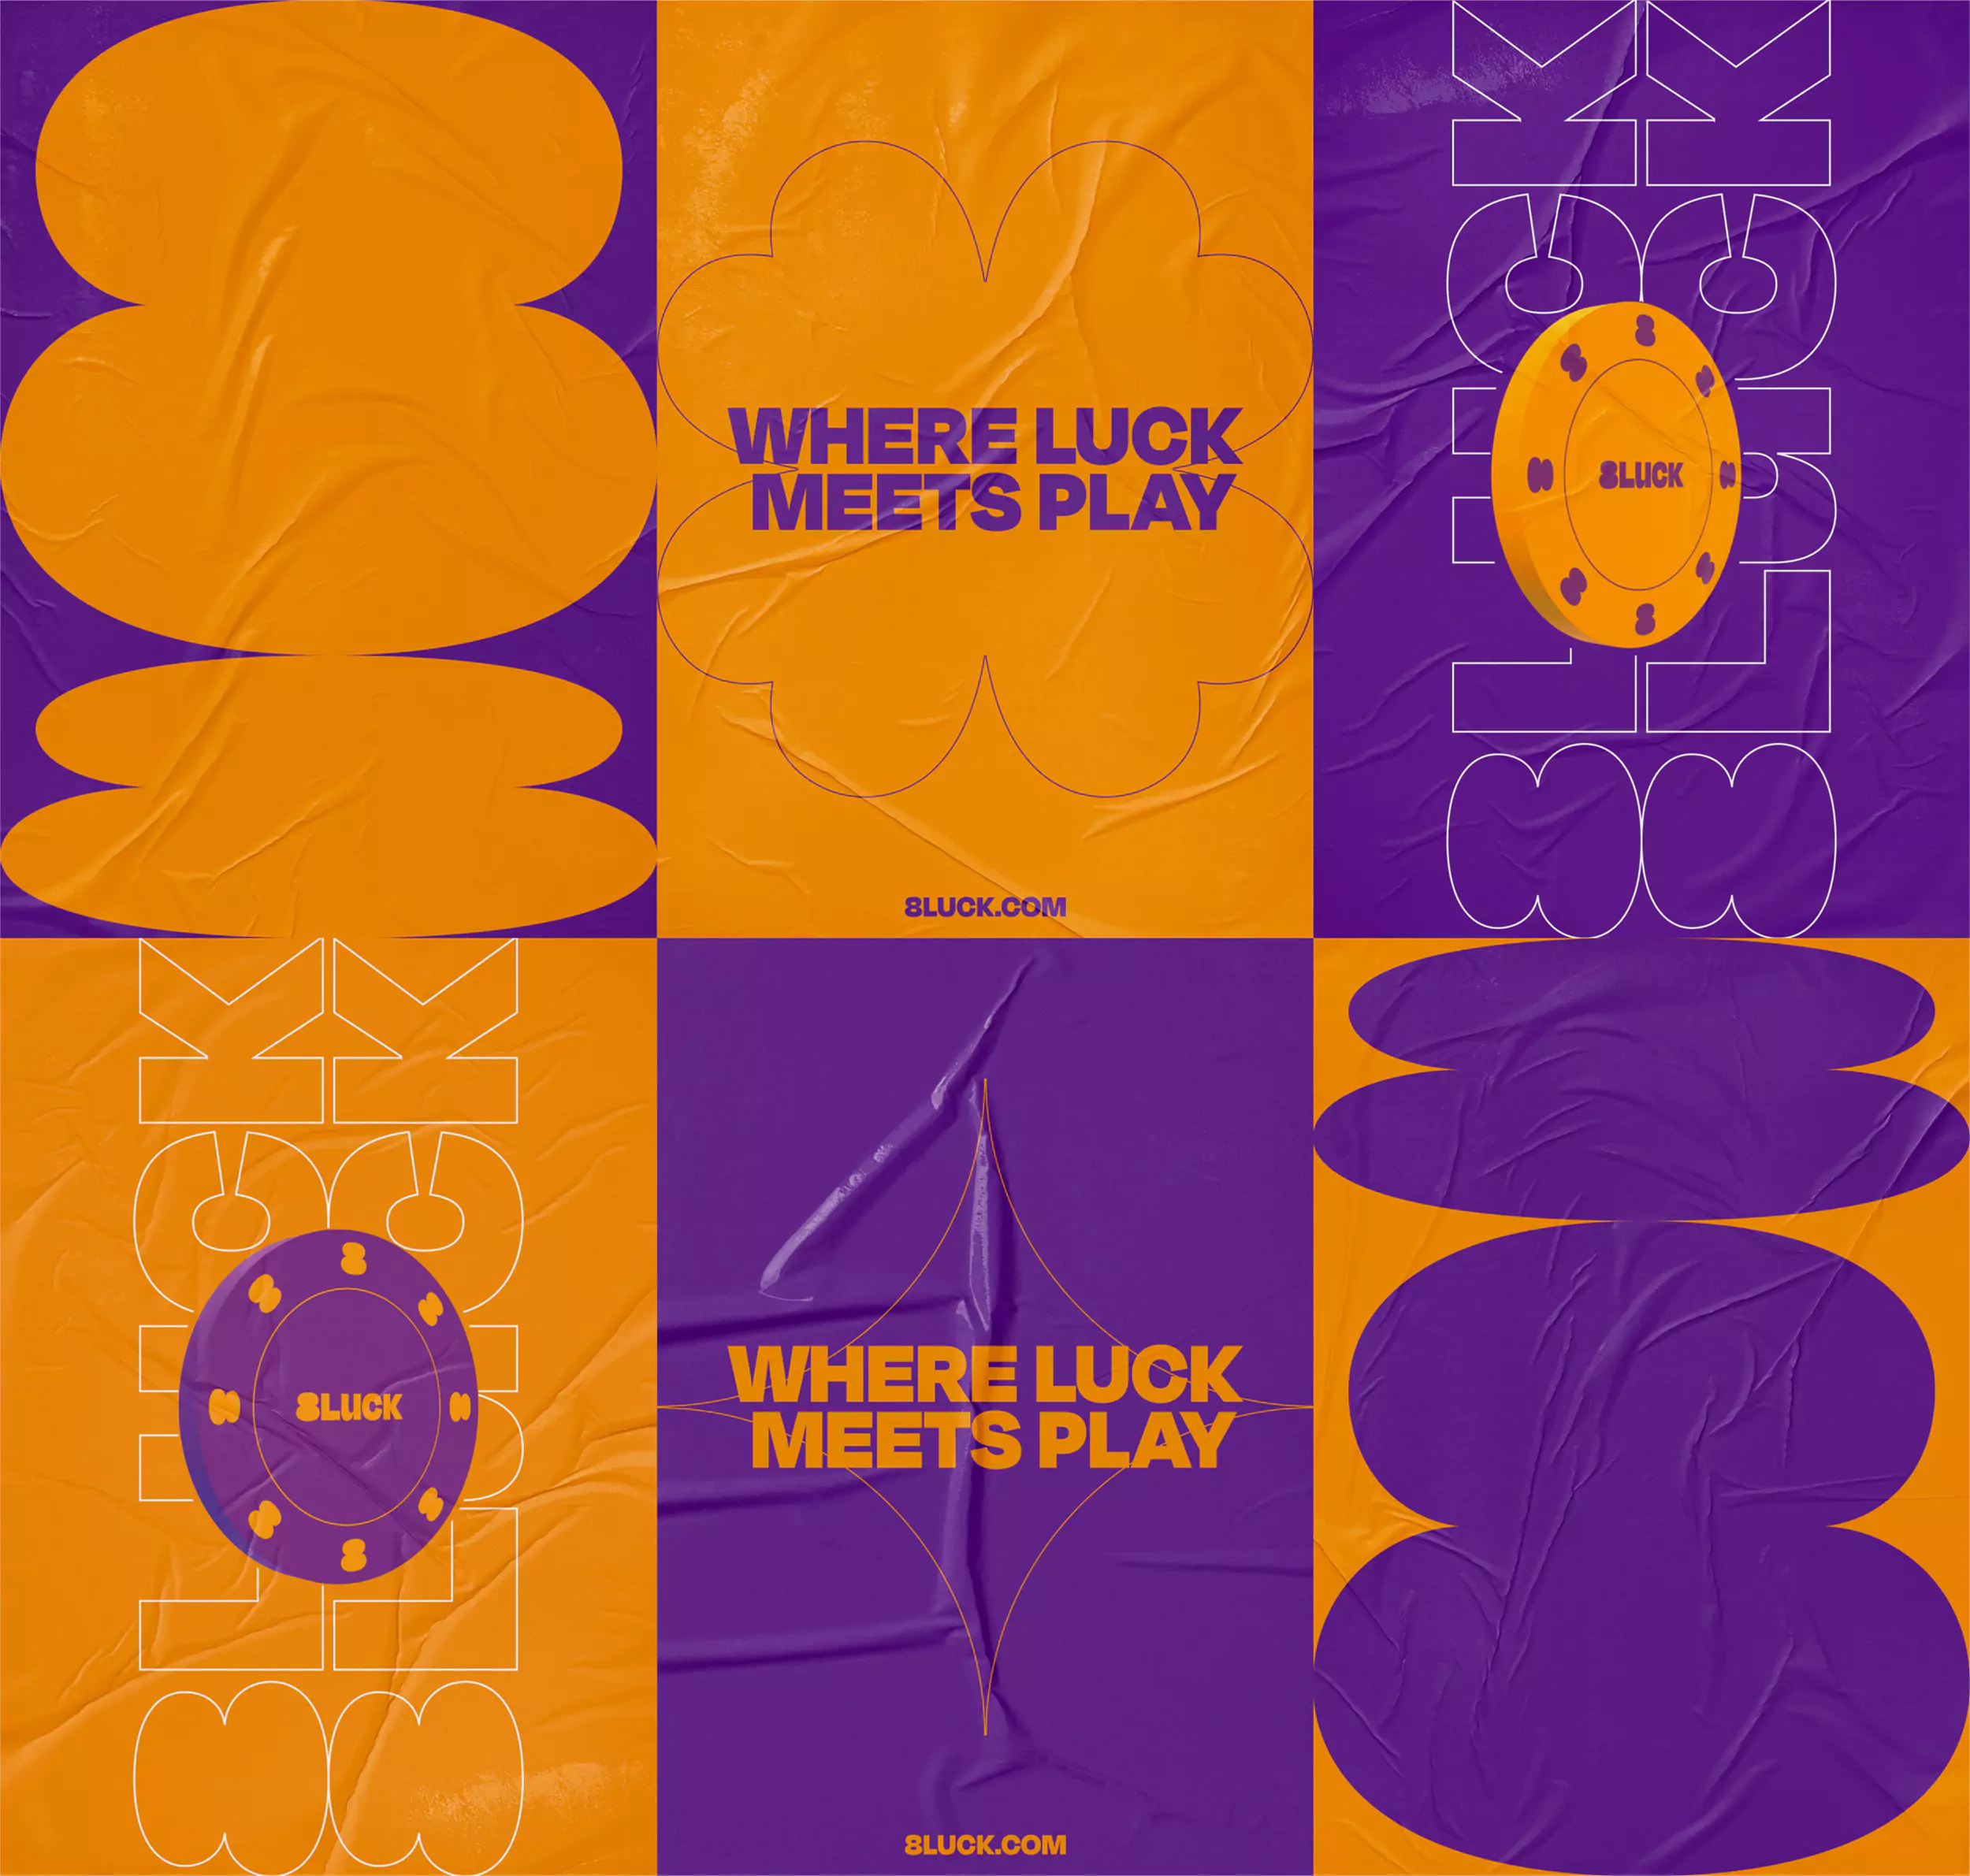 Visual Identity for 8luck - Poster Designs